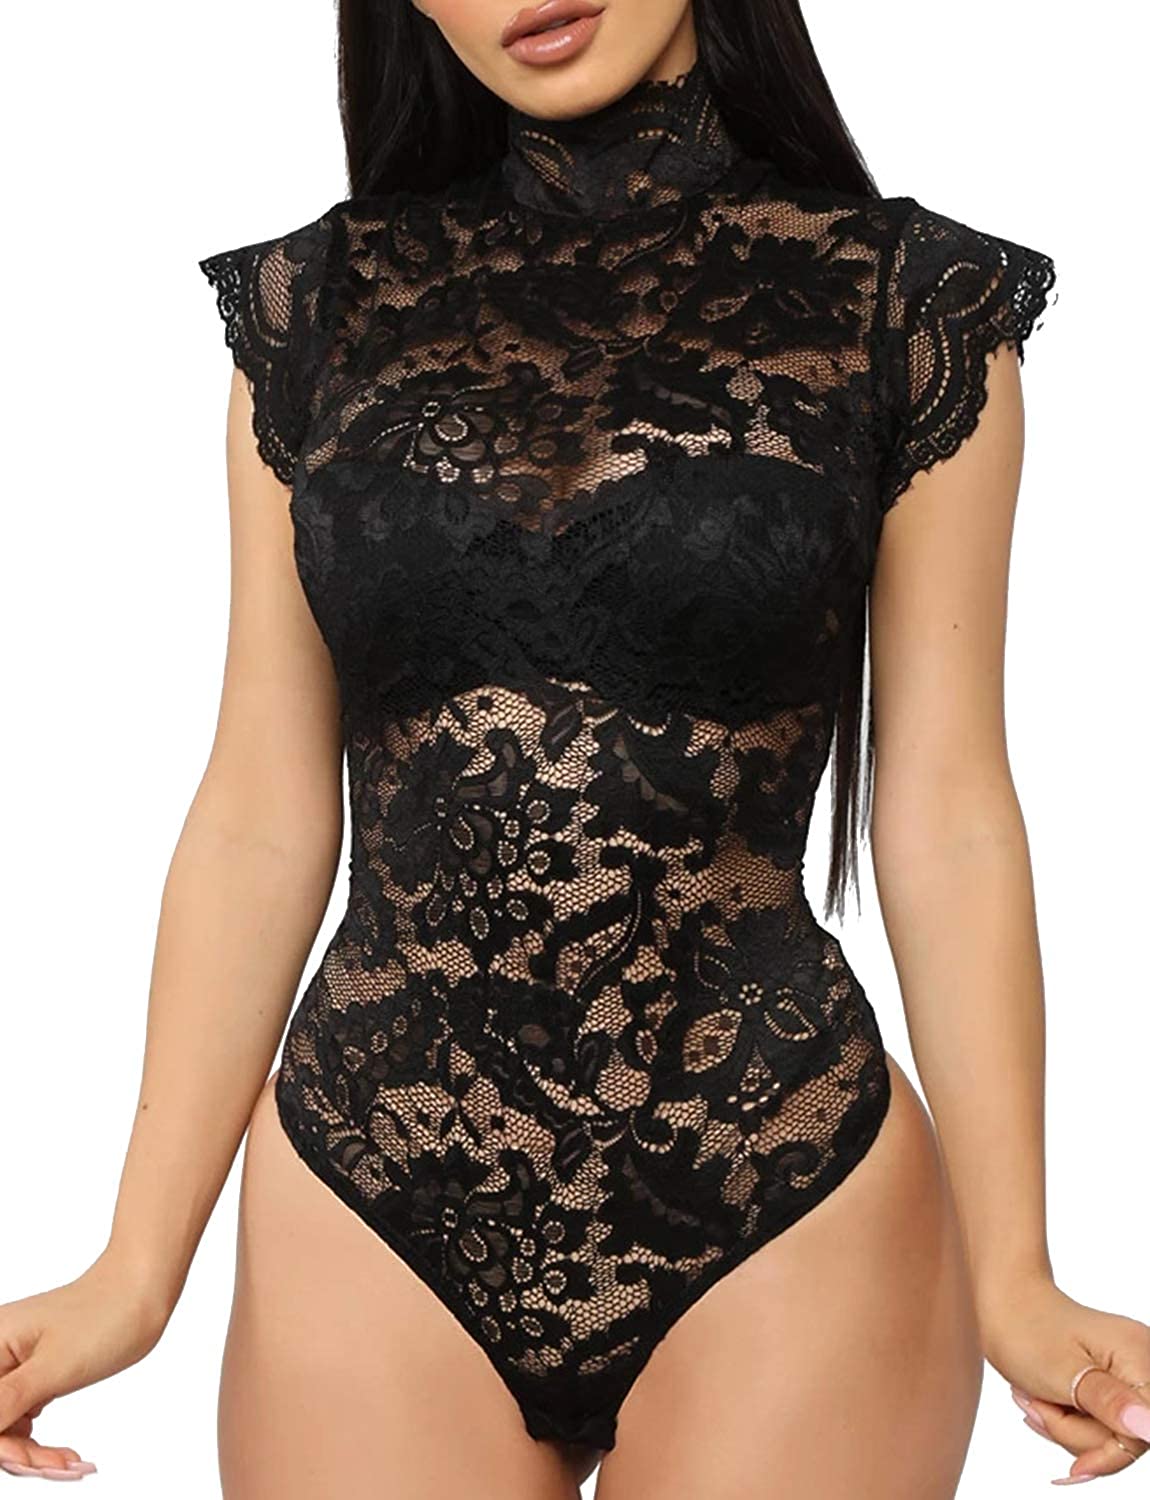 Price:$19.99 Sexy Lingeries Sheer Lace Bodysuits Push up Cross Strap Teddy Rompers at Amazon Women’s Clothing store